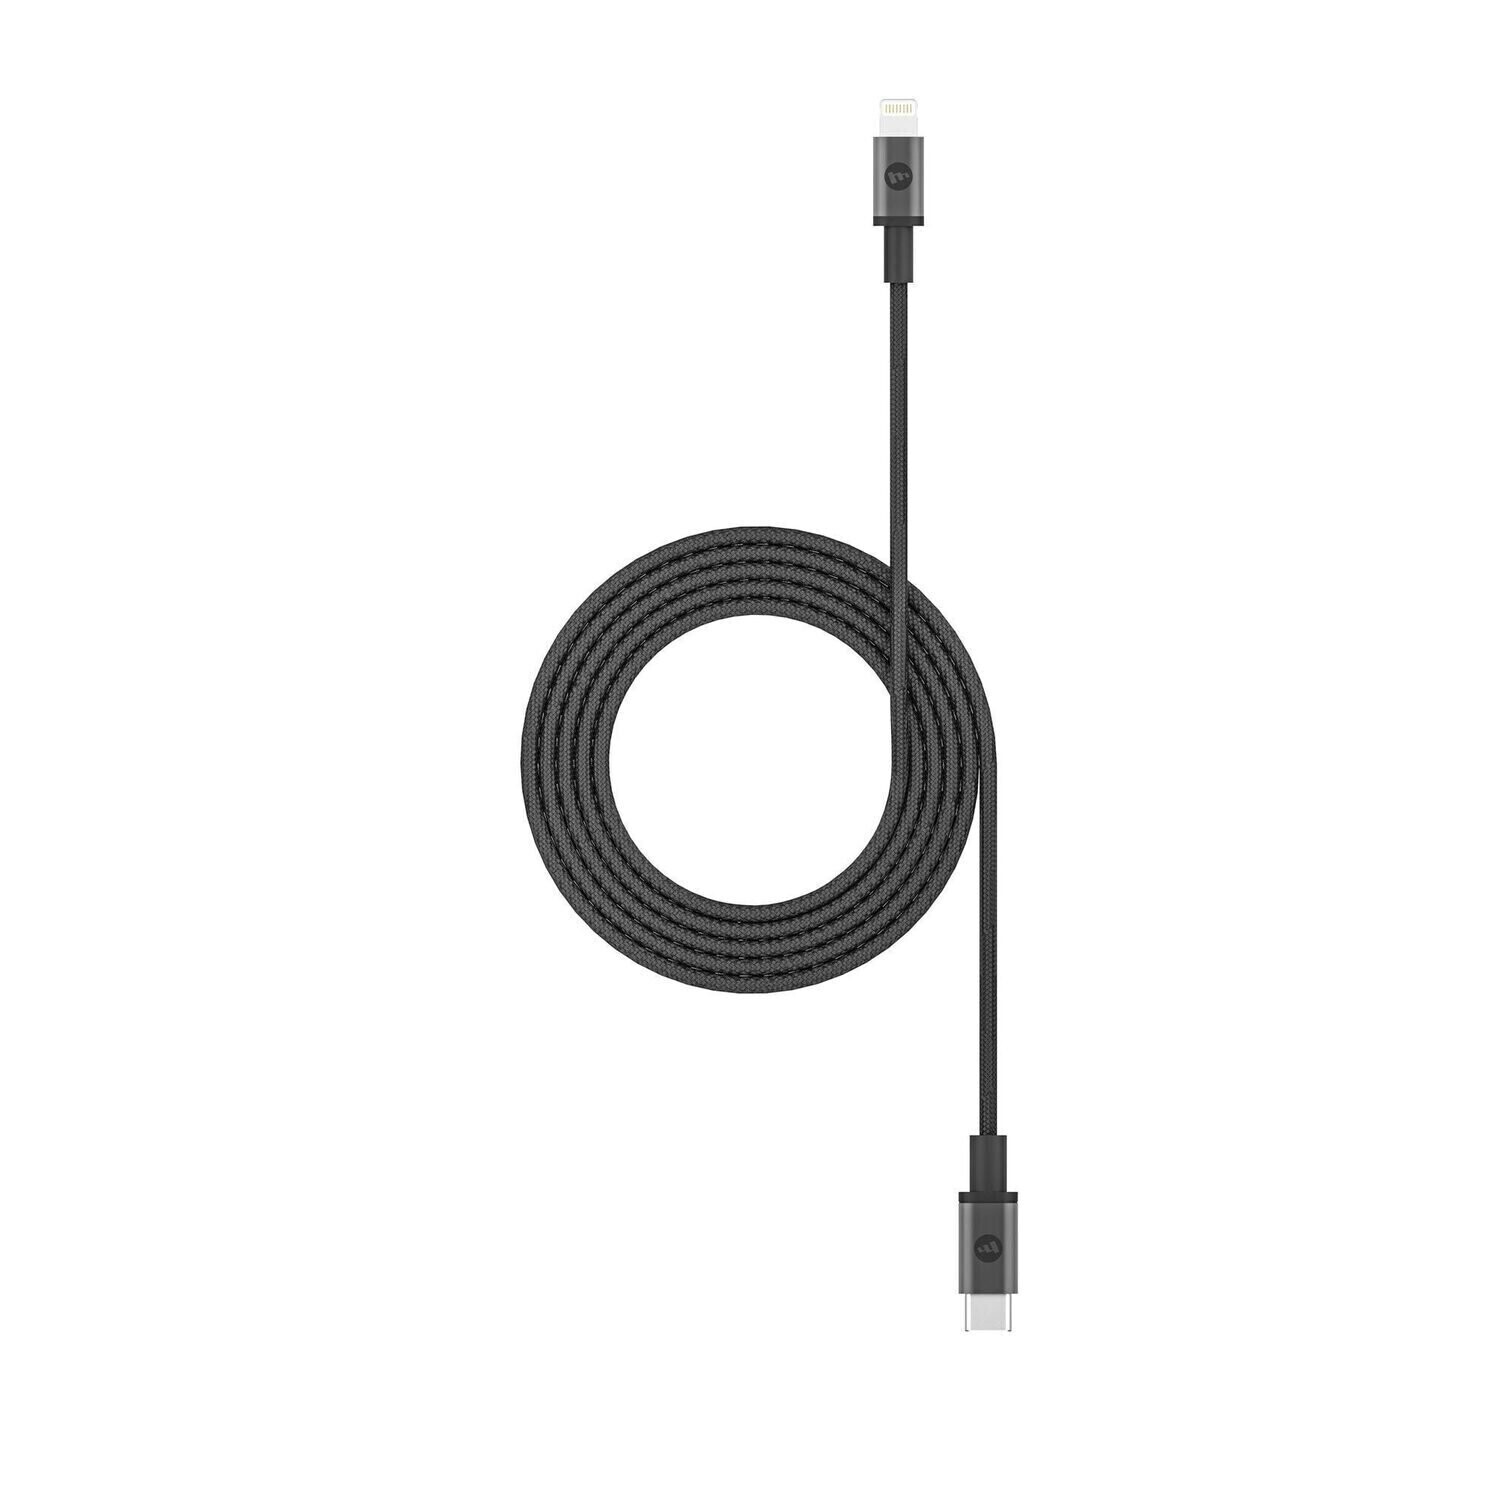 Mophie Cable USB-C to Lightning (1.8 Meter), Black